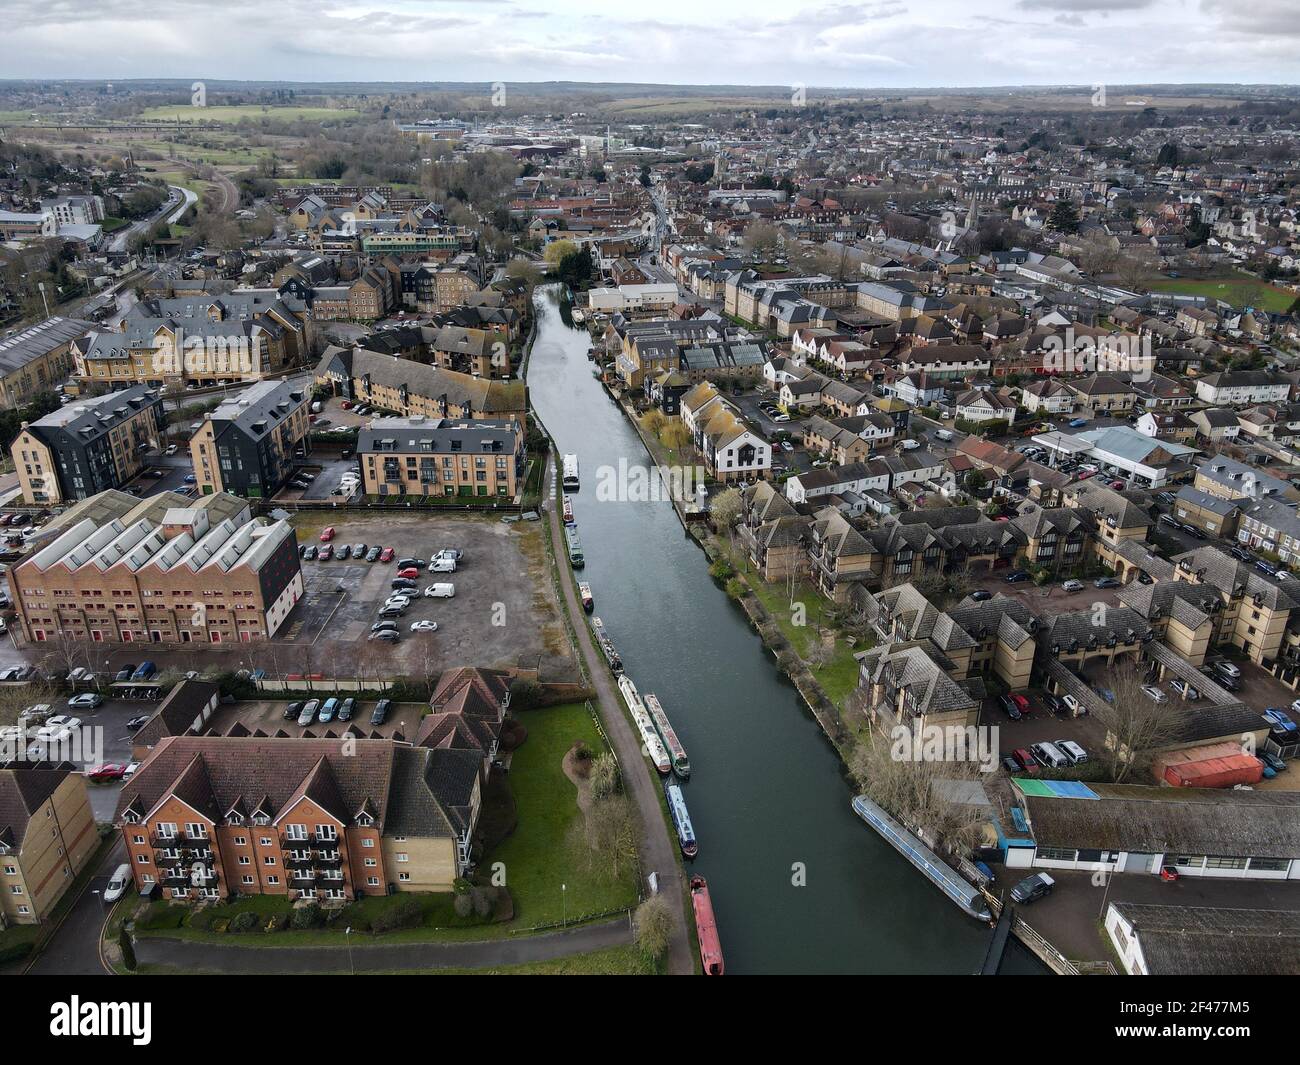 Ware Hertfordshire town and river Lea UK Aerial image Stock Photo